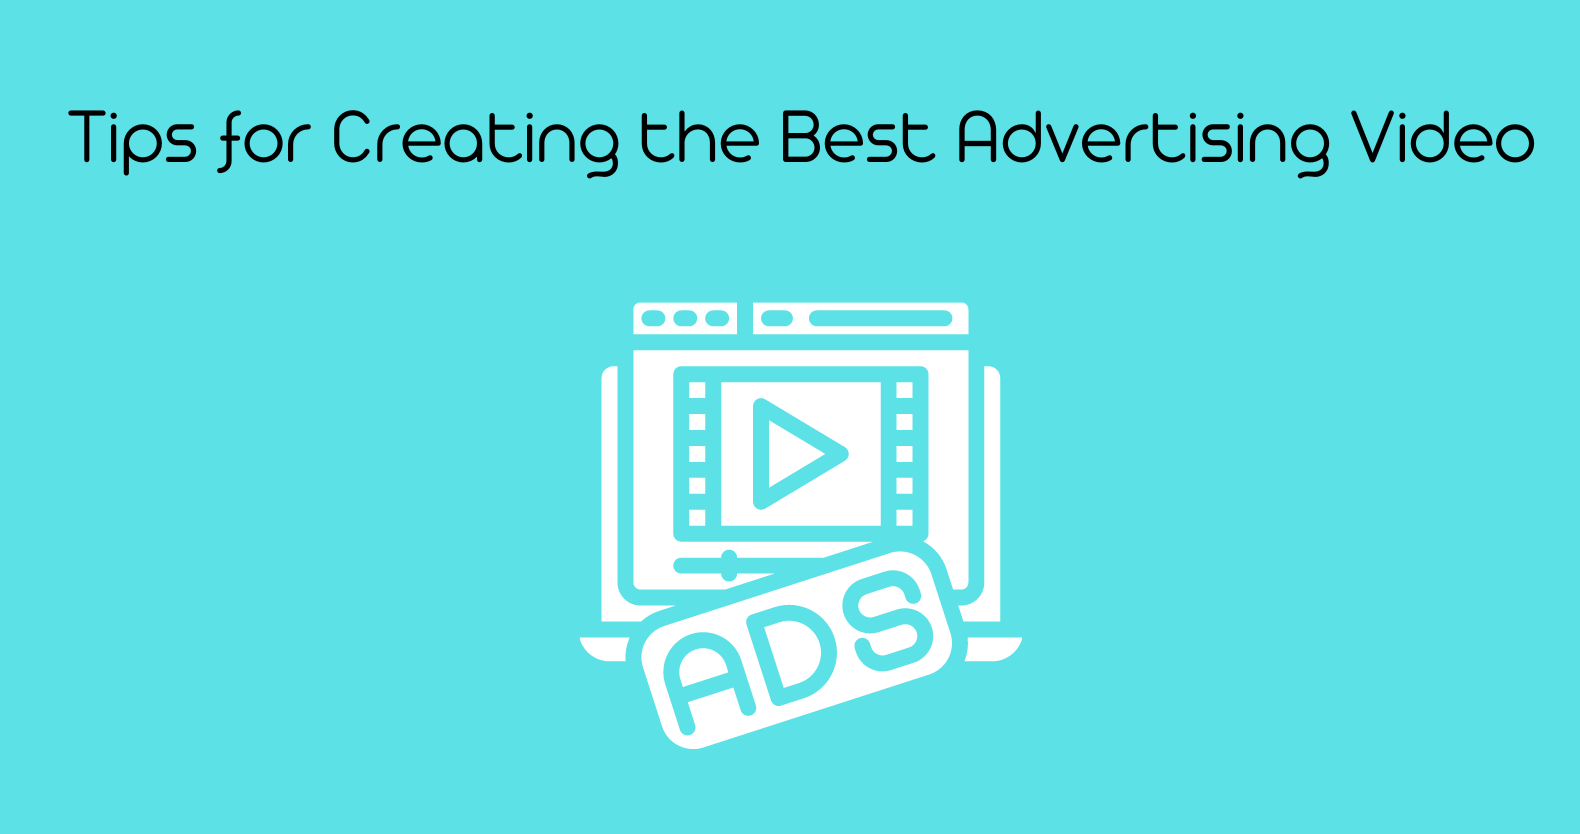 Tips for Creating the Best Advertising Video